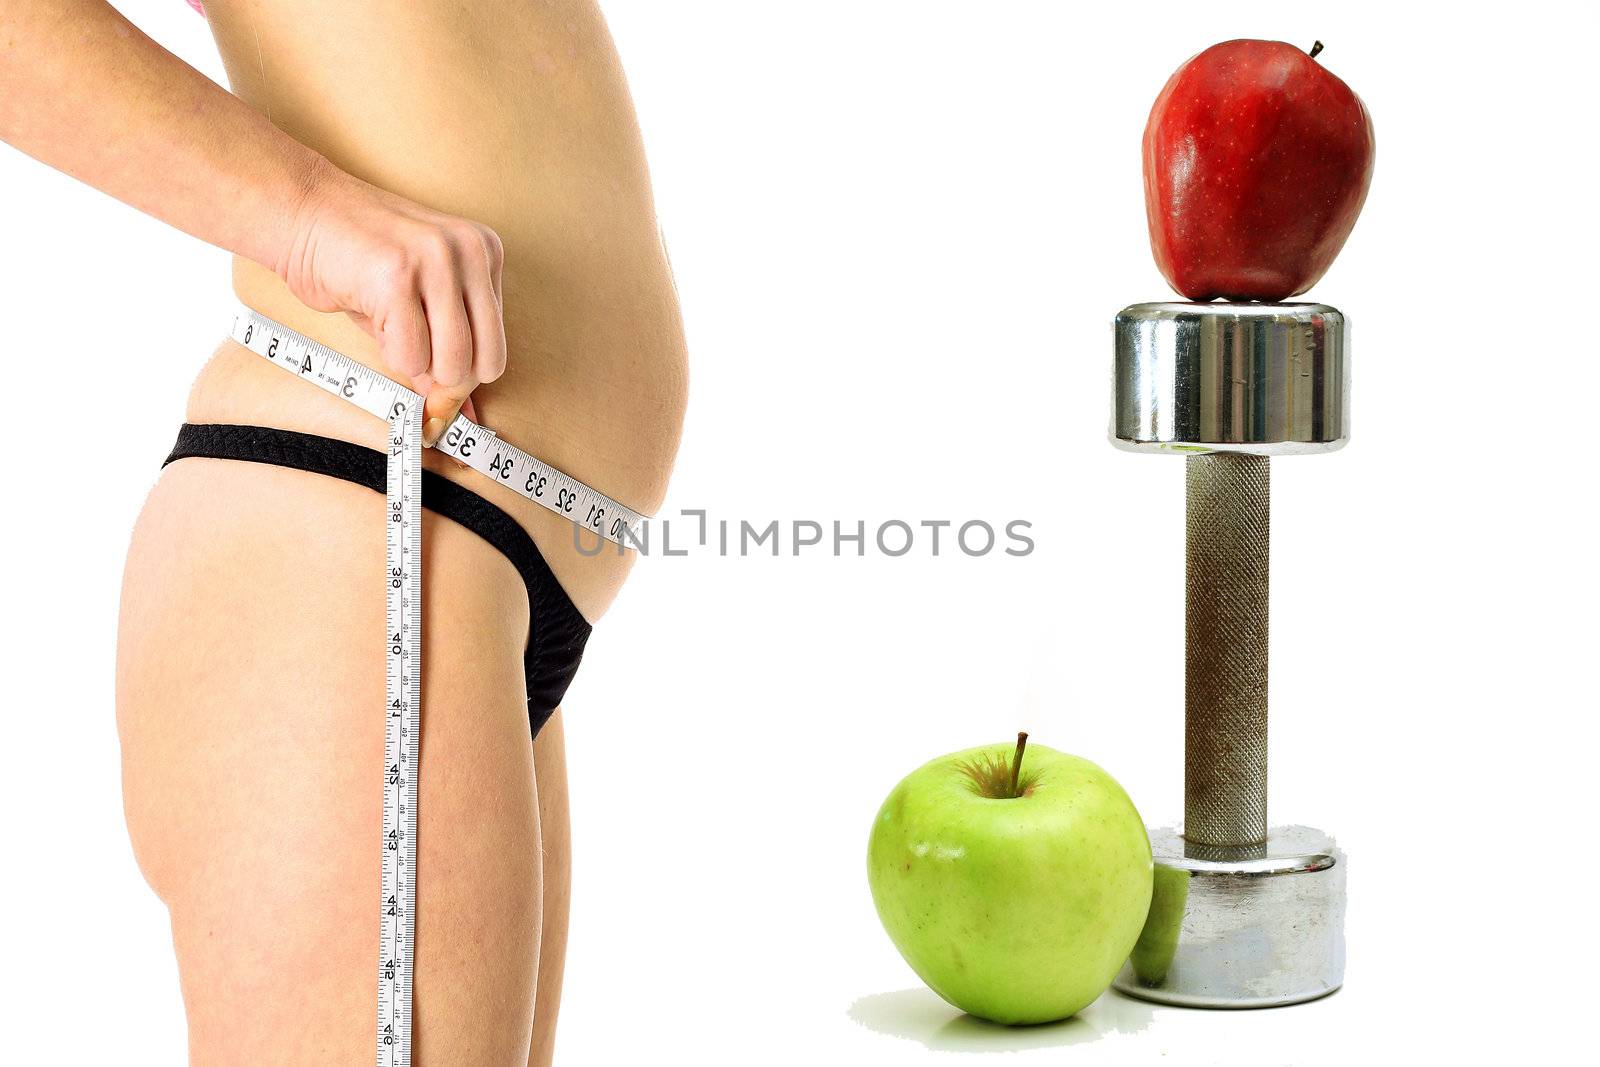 Big belly weight apples